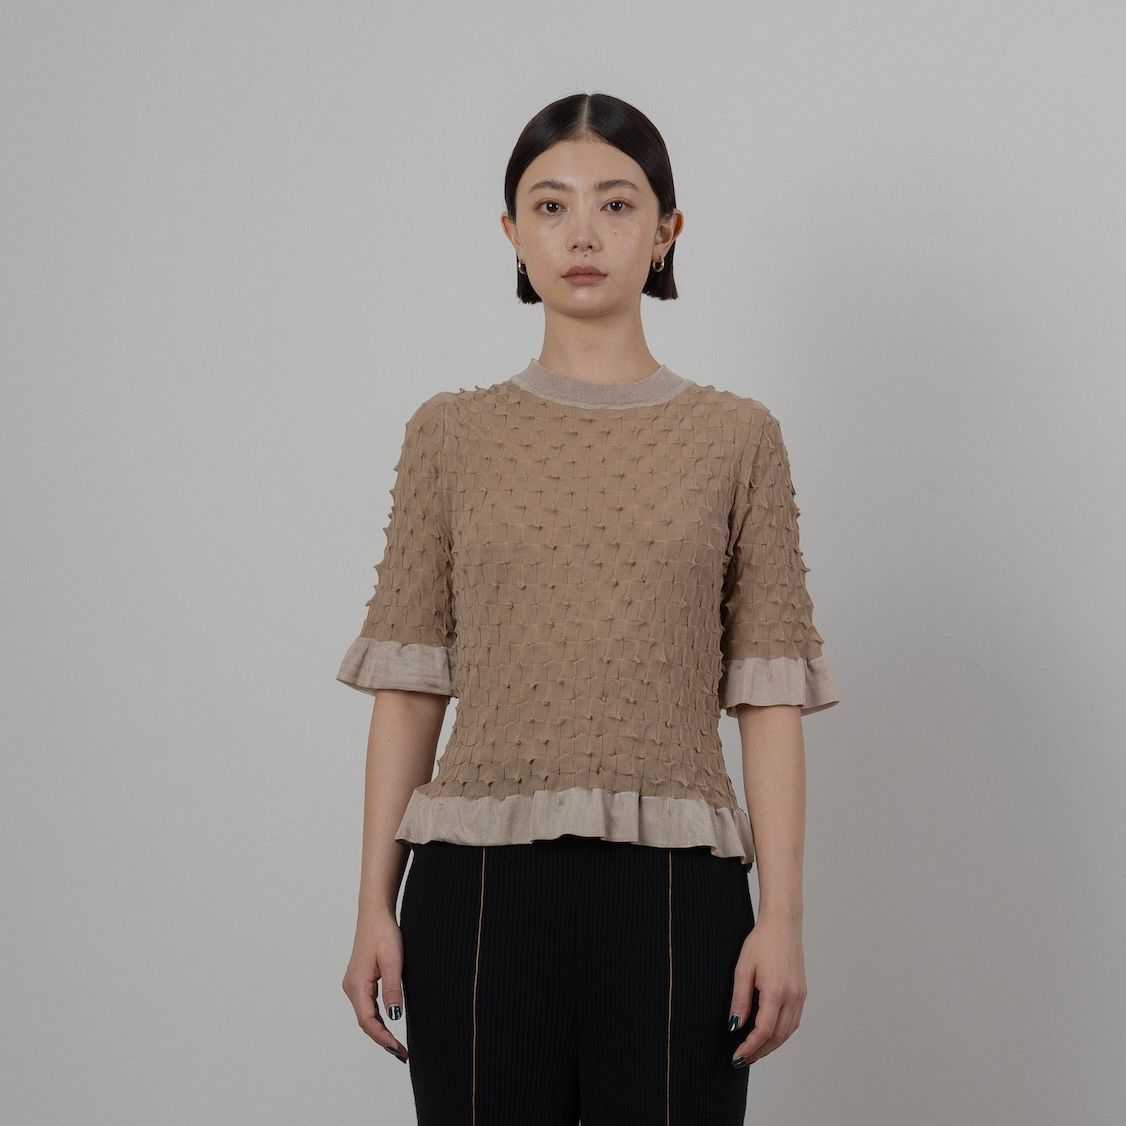 TAN - 【残り一点】Tiny Horns Knitted Tops | ACRMTSM ONLINE STORE